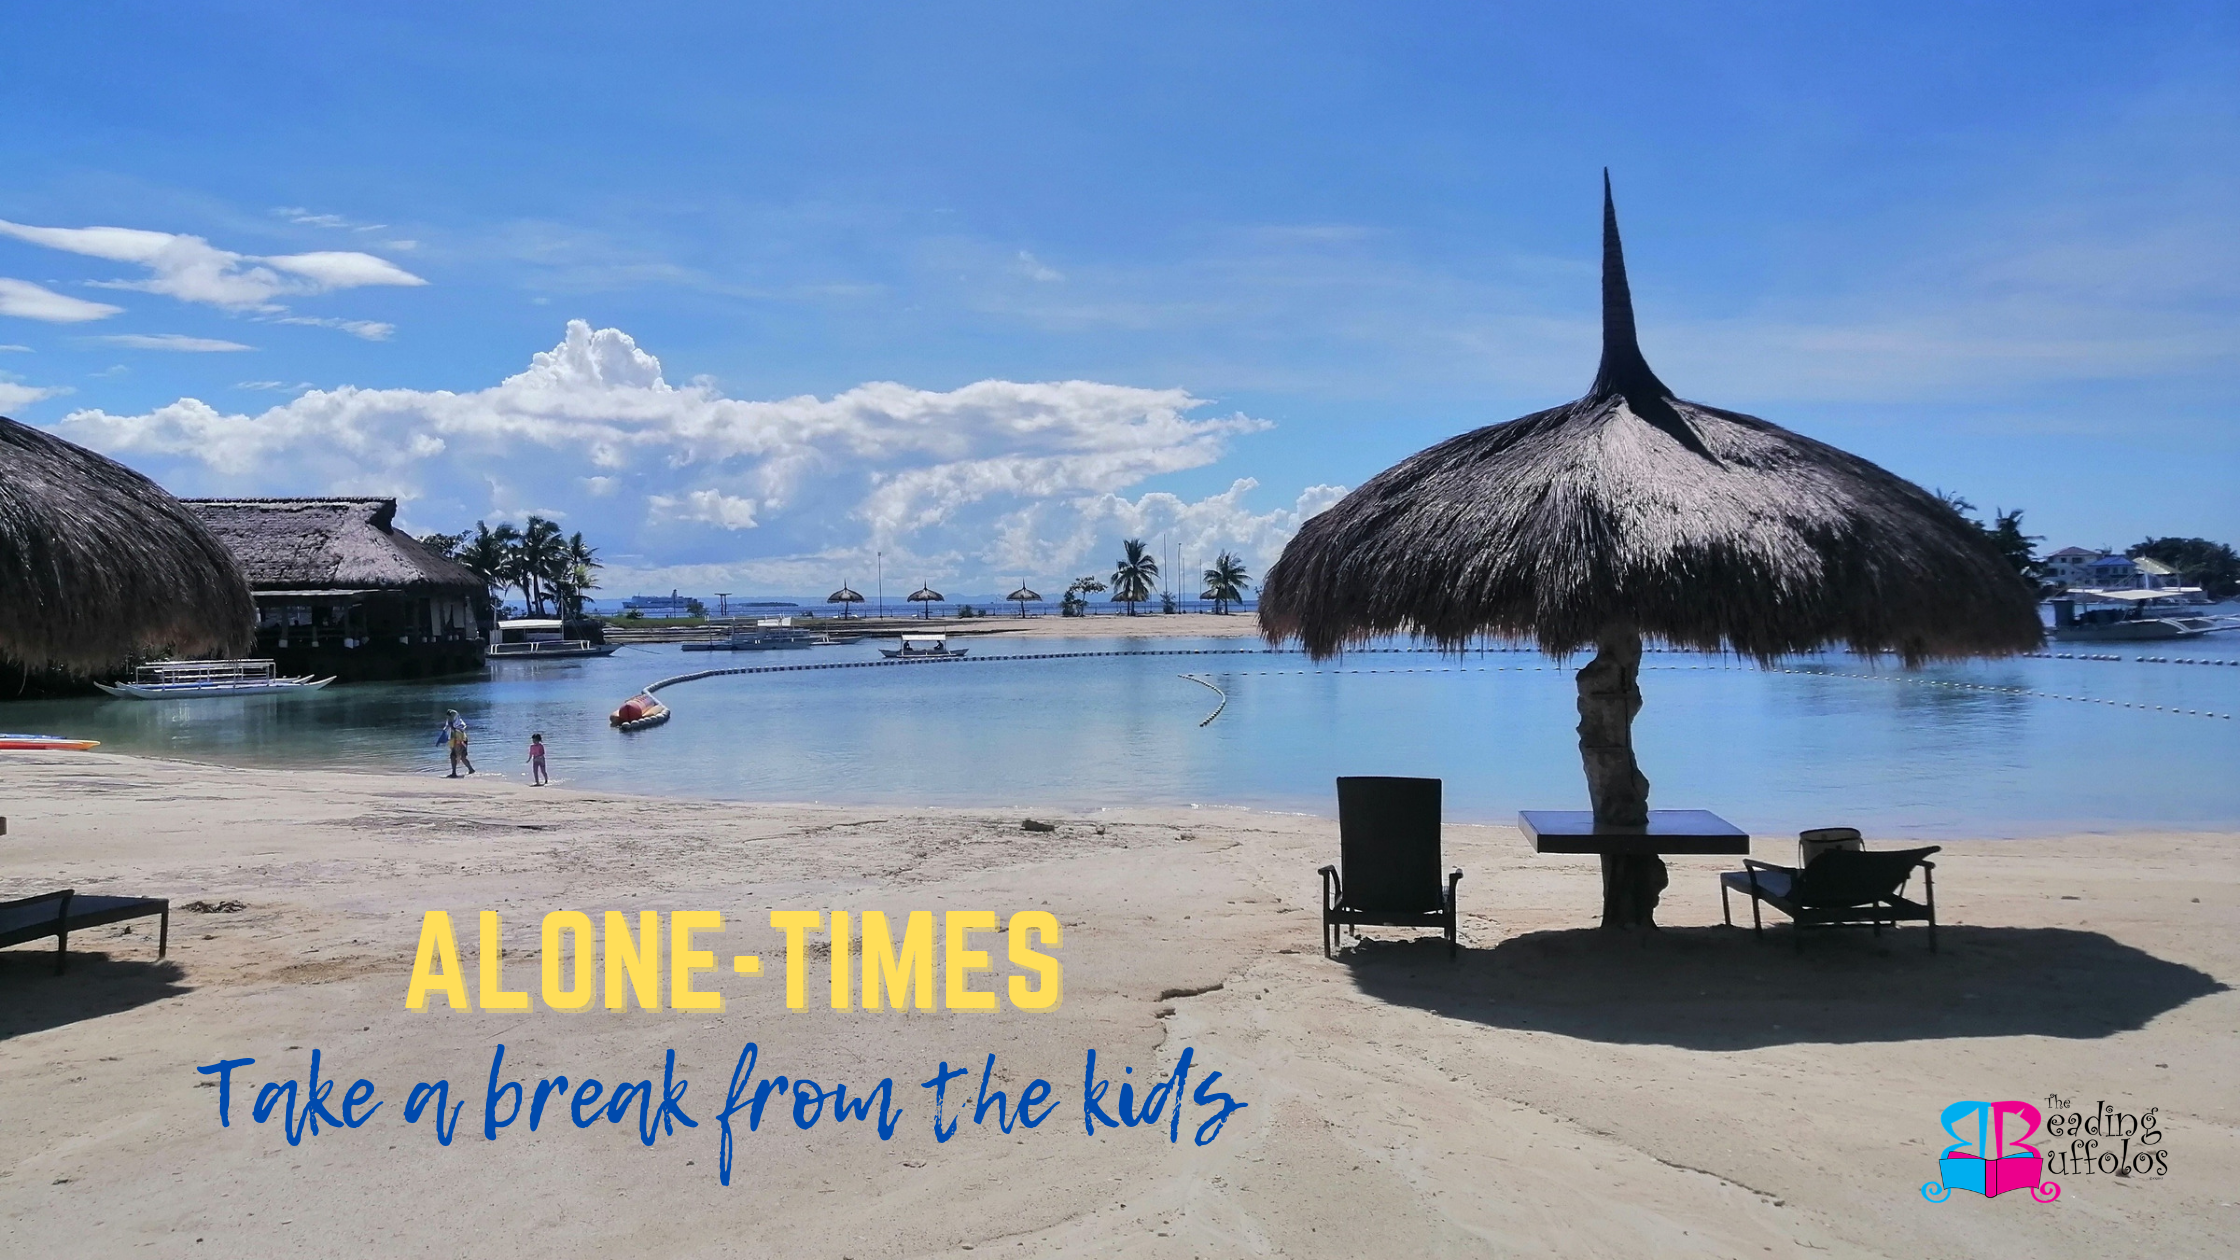 Alone-times: Taking a break from the kids